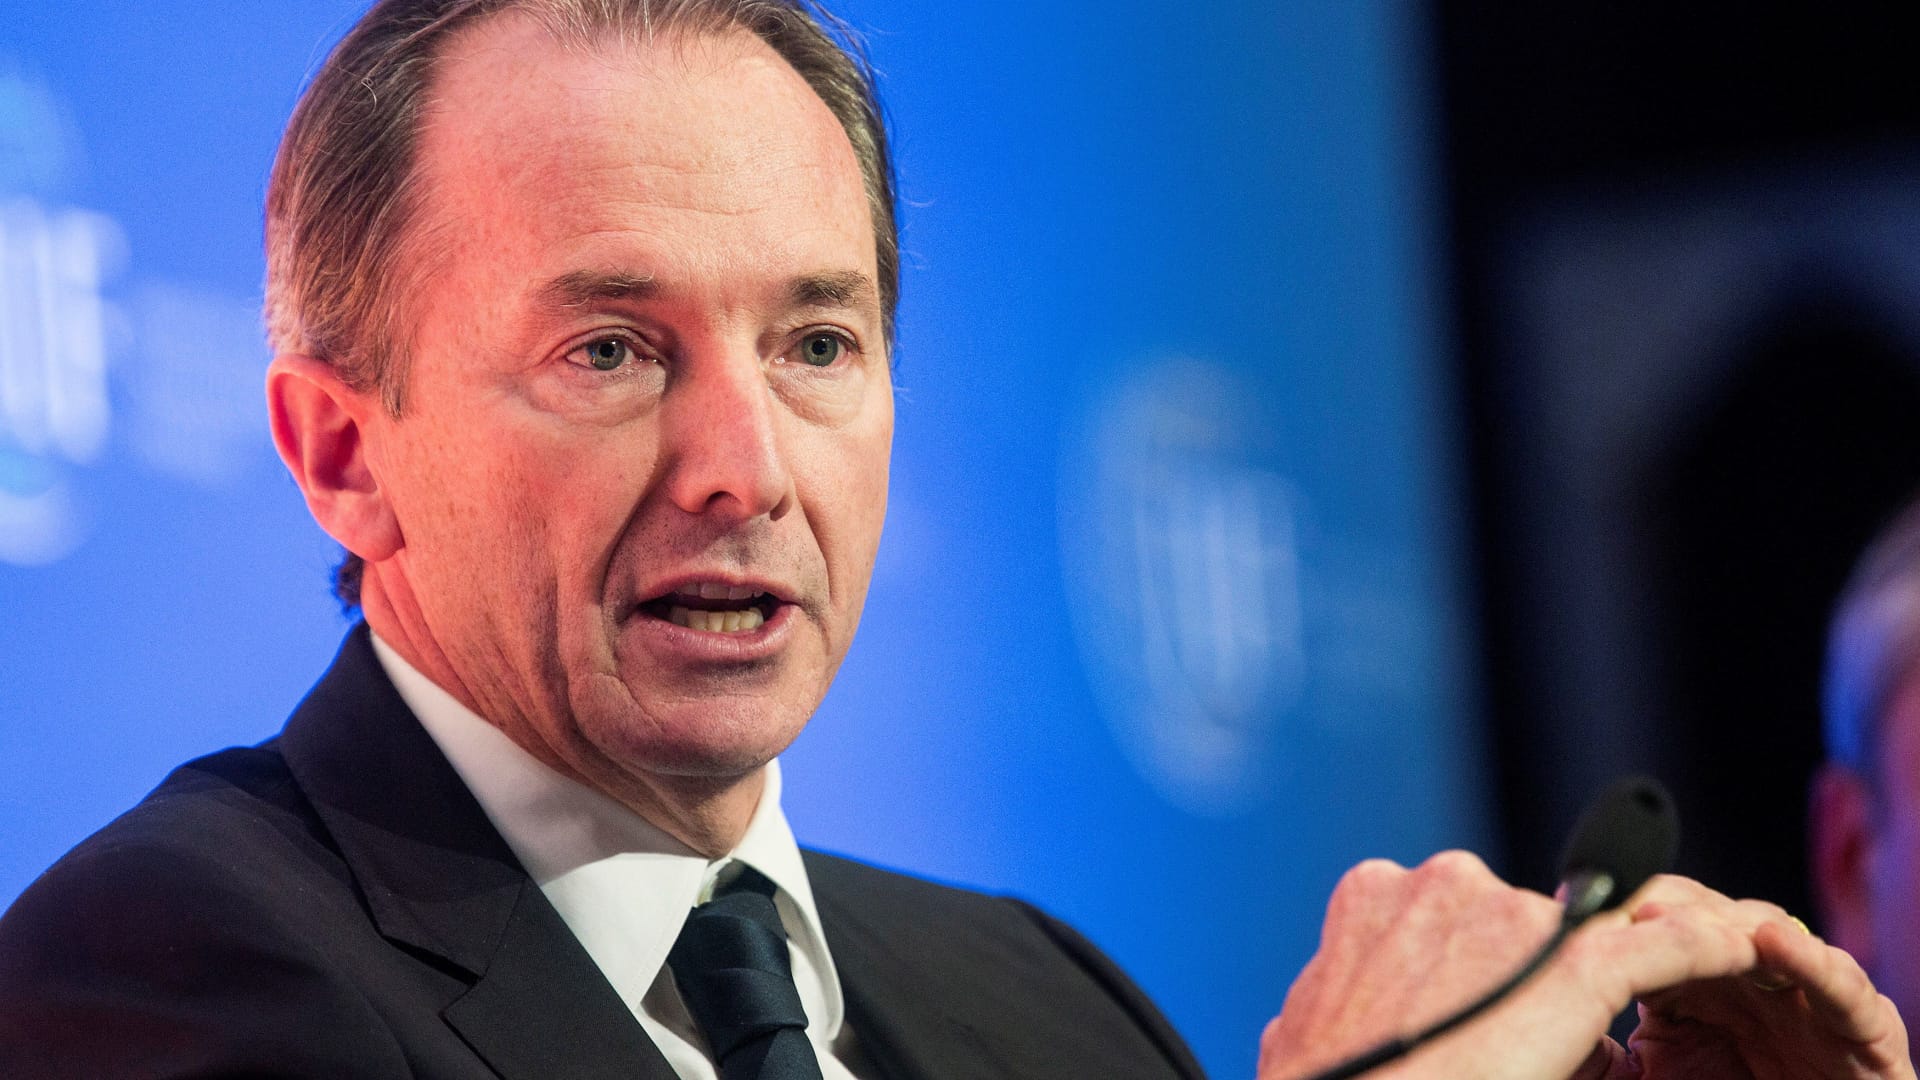 Morgan Stanley CEO Gorman says he's confident deal activity will return once the Fed pauses